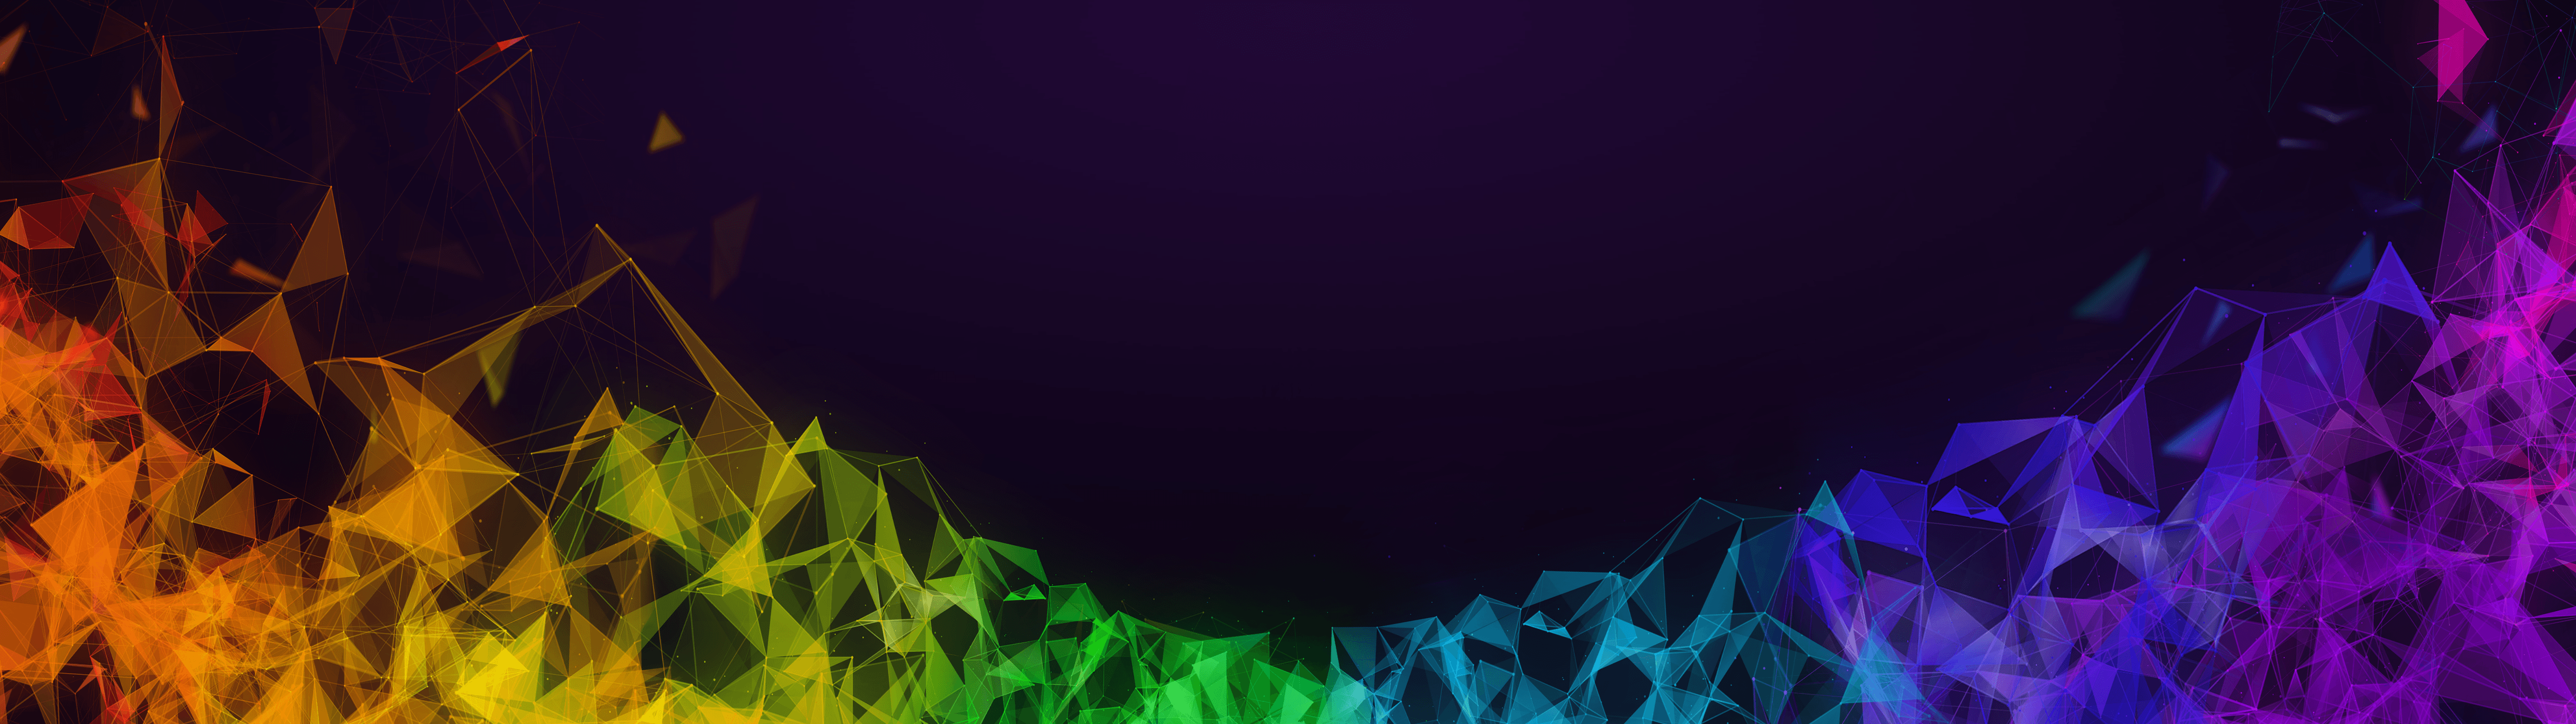 A digital image of a colorful, abstract landscape. - 5120x1440